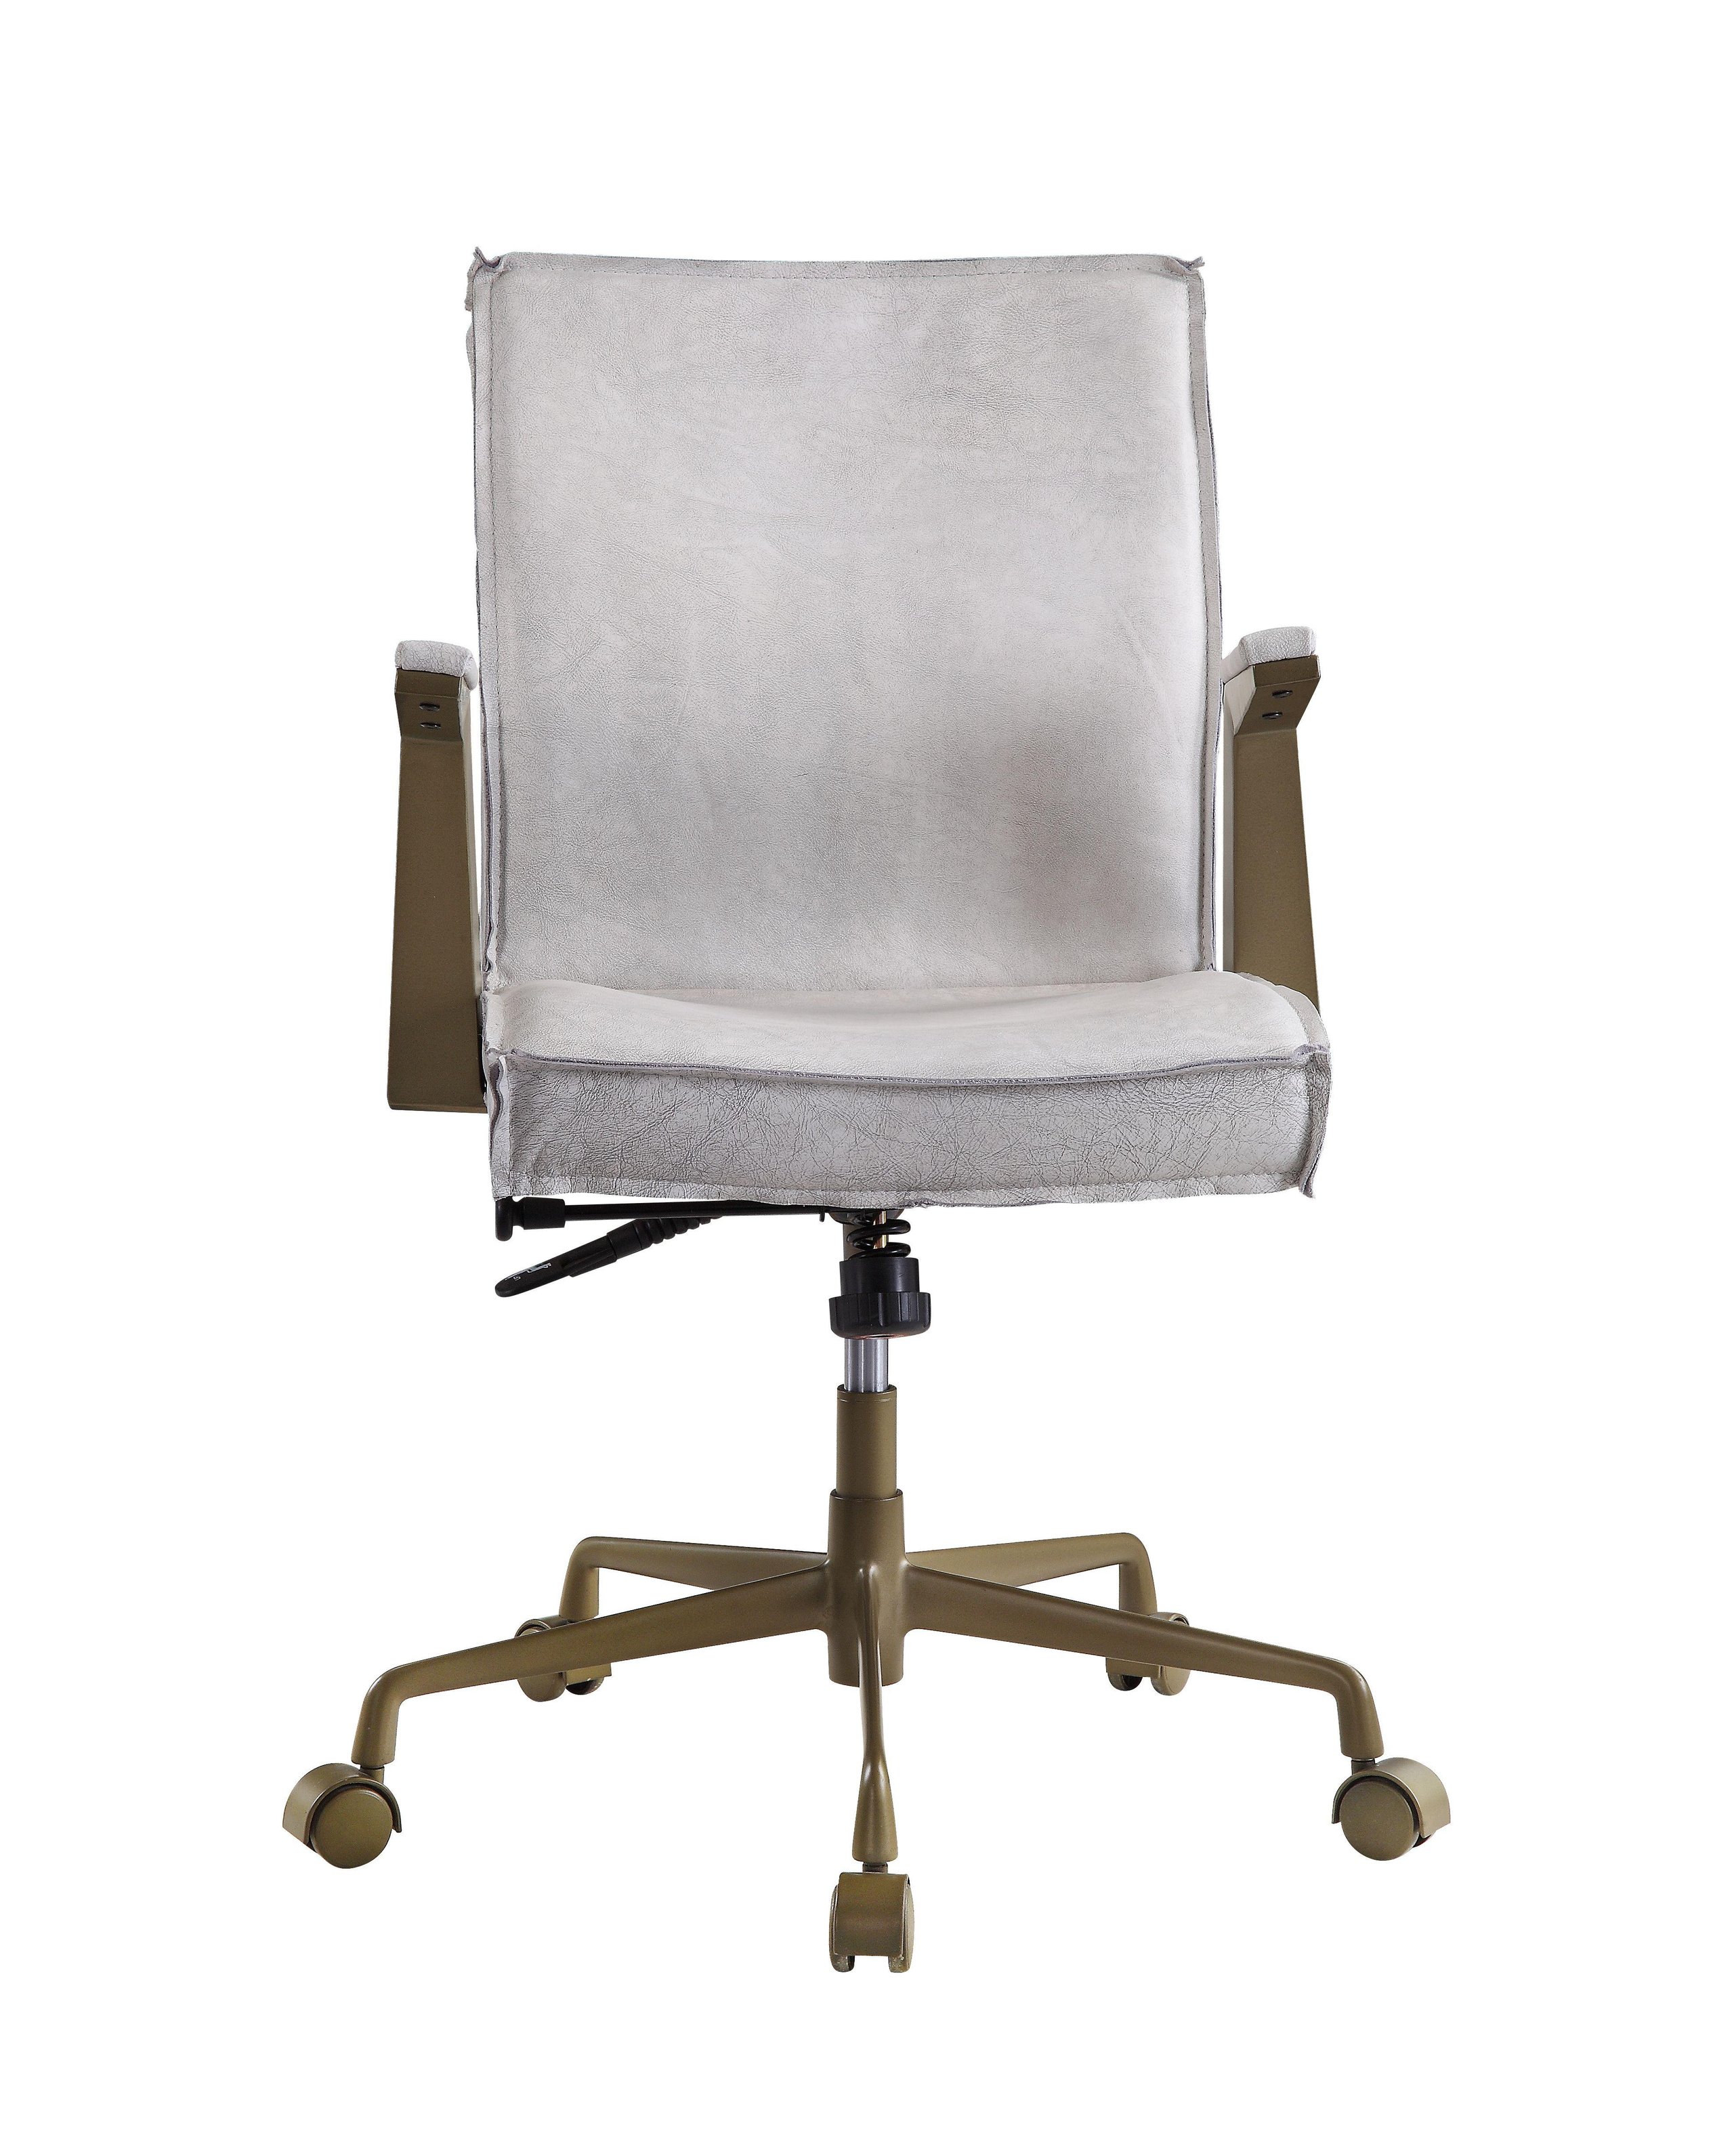 Buy ACME Attica Executive Office Chair in Vintage White, Top grain ...